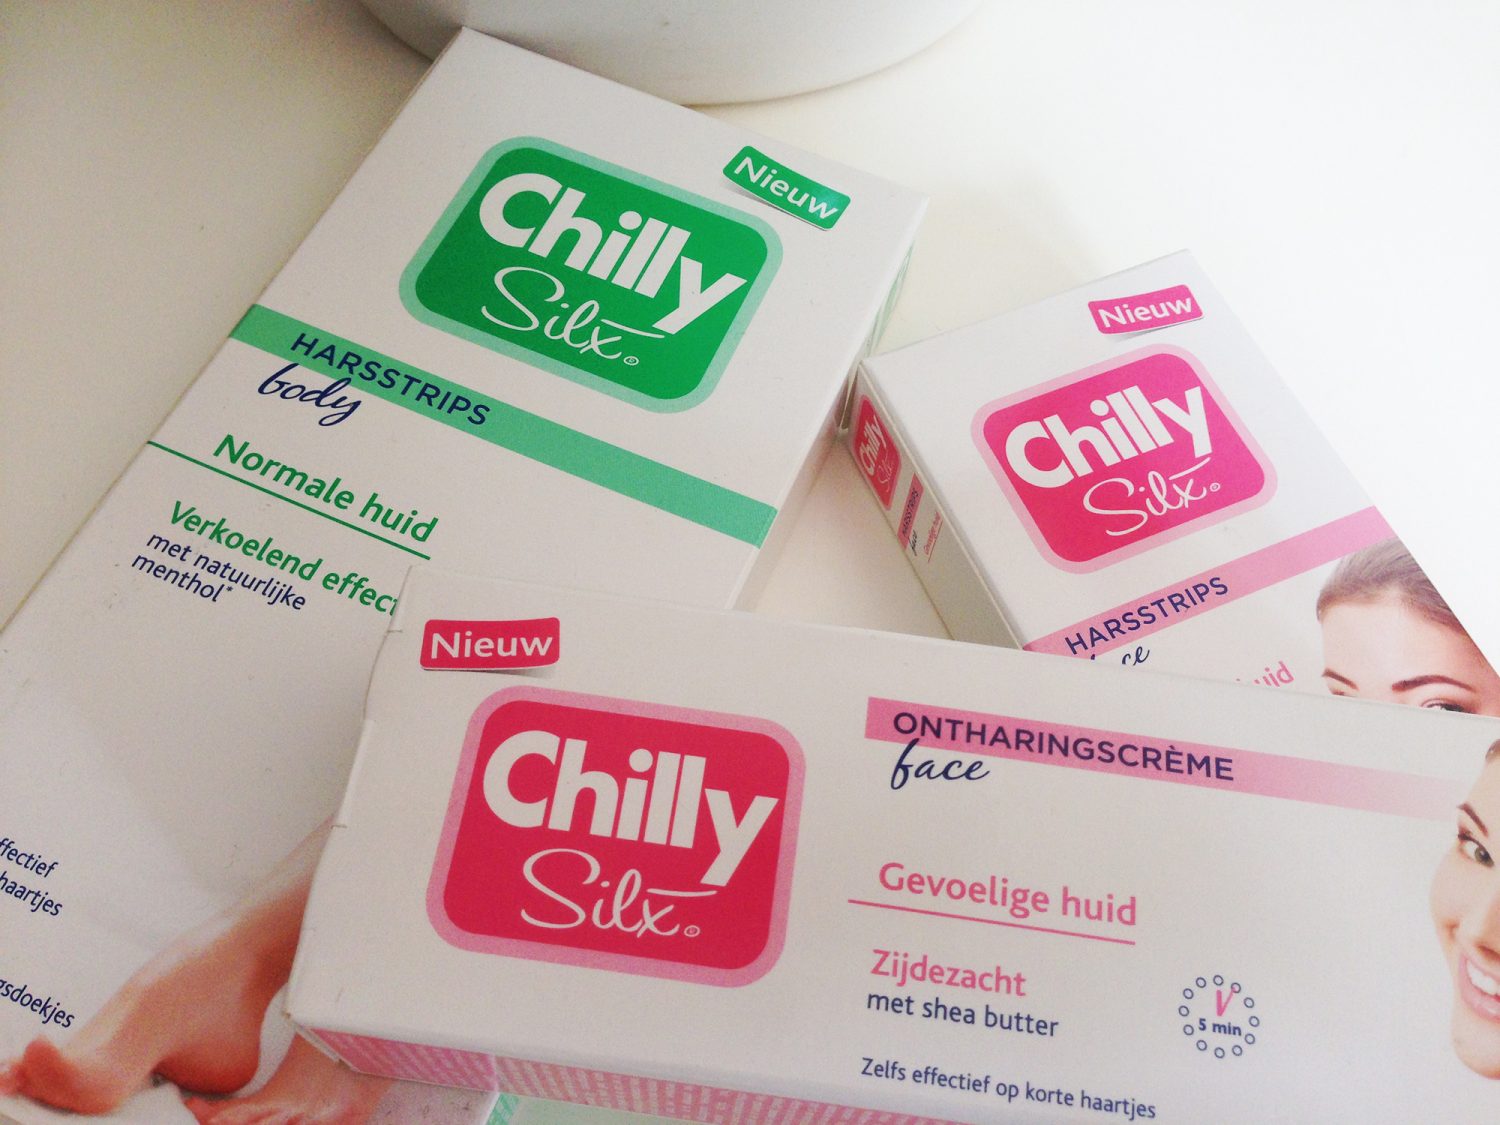 Stapelreview Chilly Silx Ontharingscreme en harsstrips Gezicht & Body